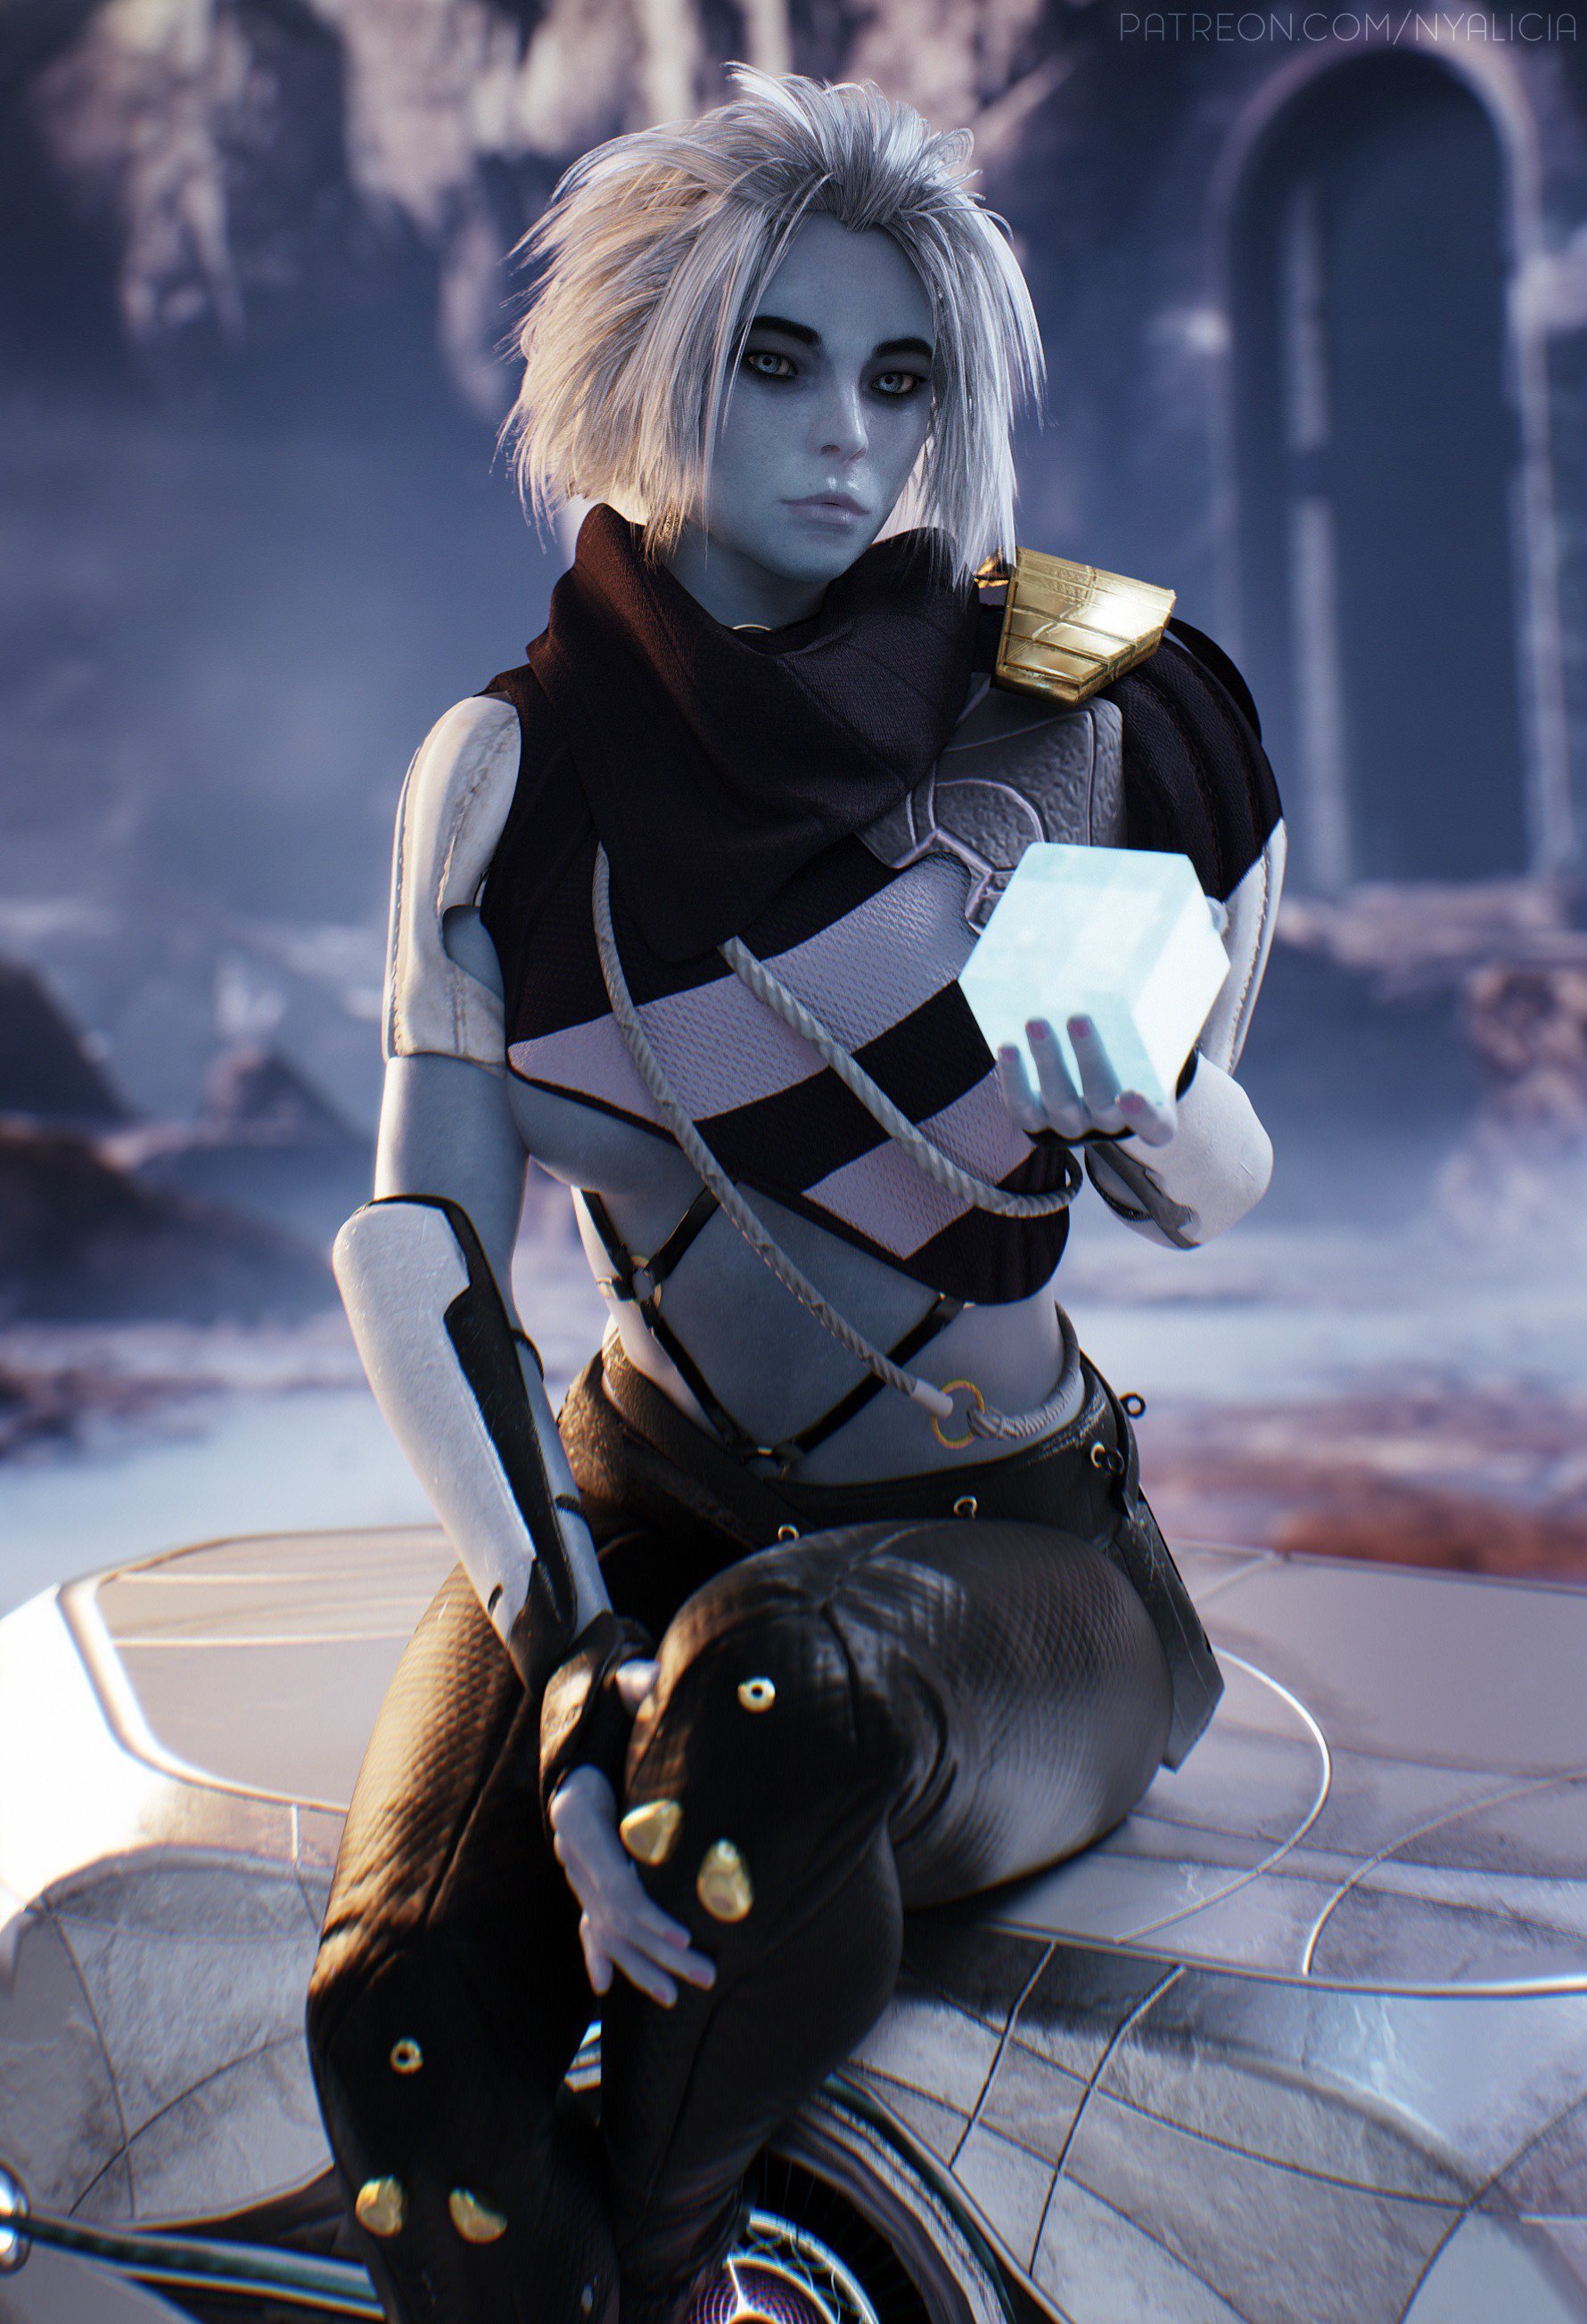 Nyalicia✿ [Destiny 2] Mara Sov Queen Of The Awoken In Dreaming City Hi Res: Hi Res Underwear: Support Me On Patreon And Get NSFW Image! Discord